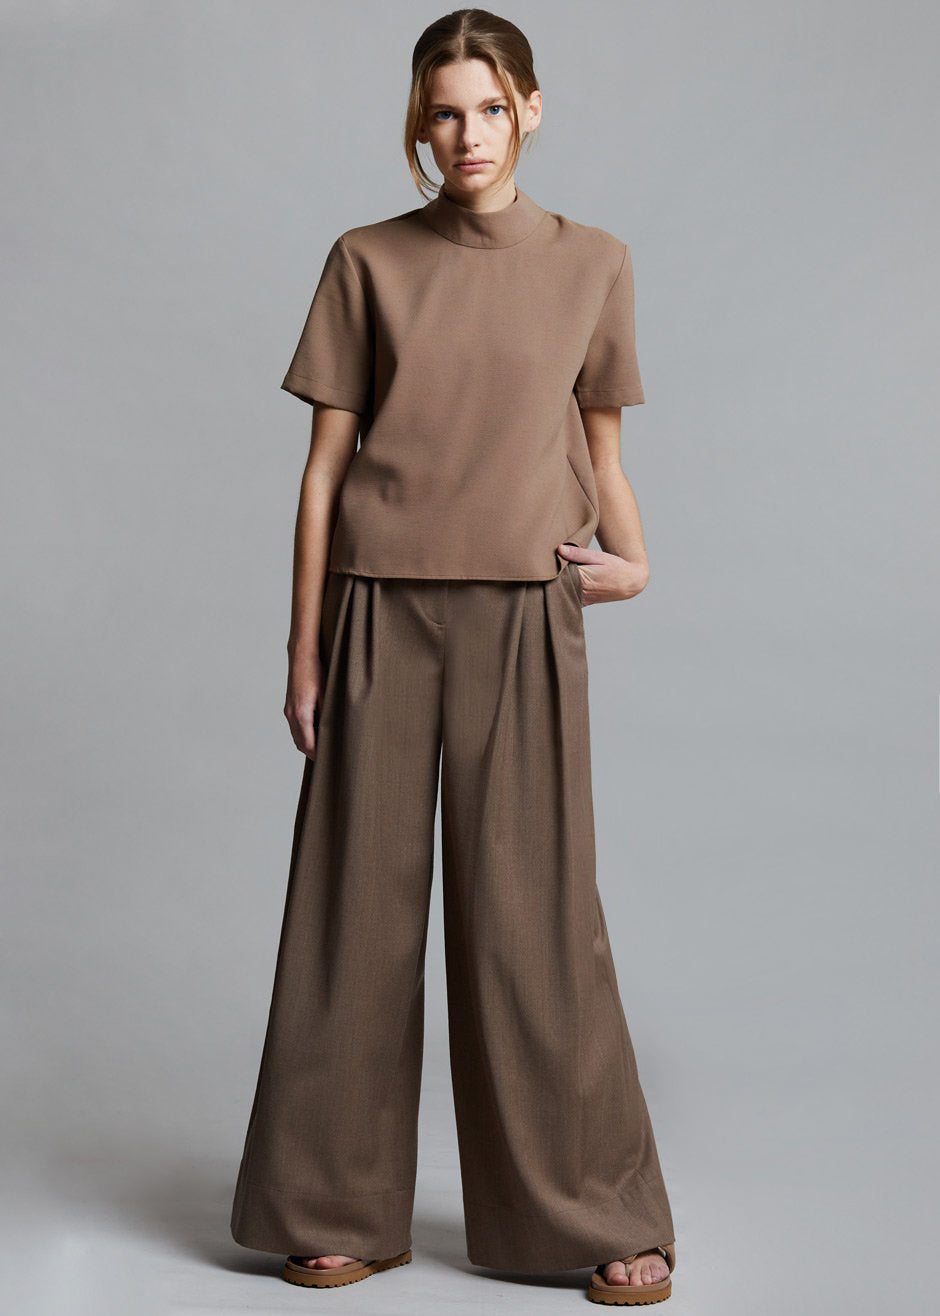 Equus Pants by The Garment in Taupe